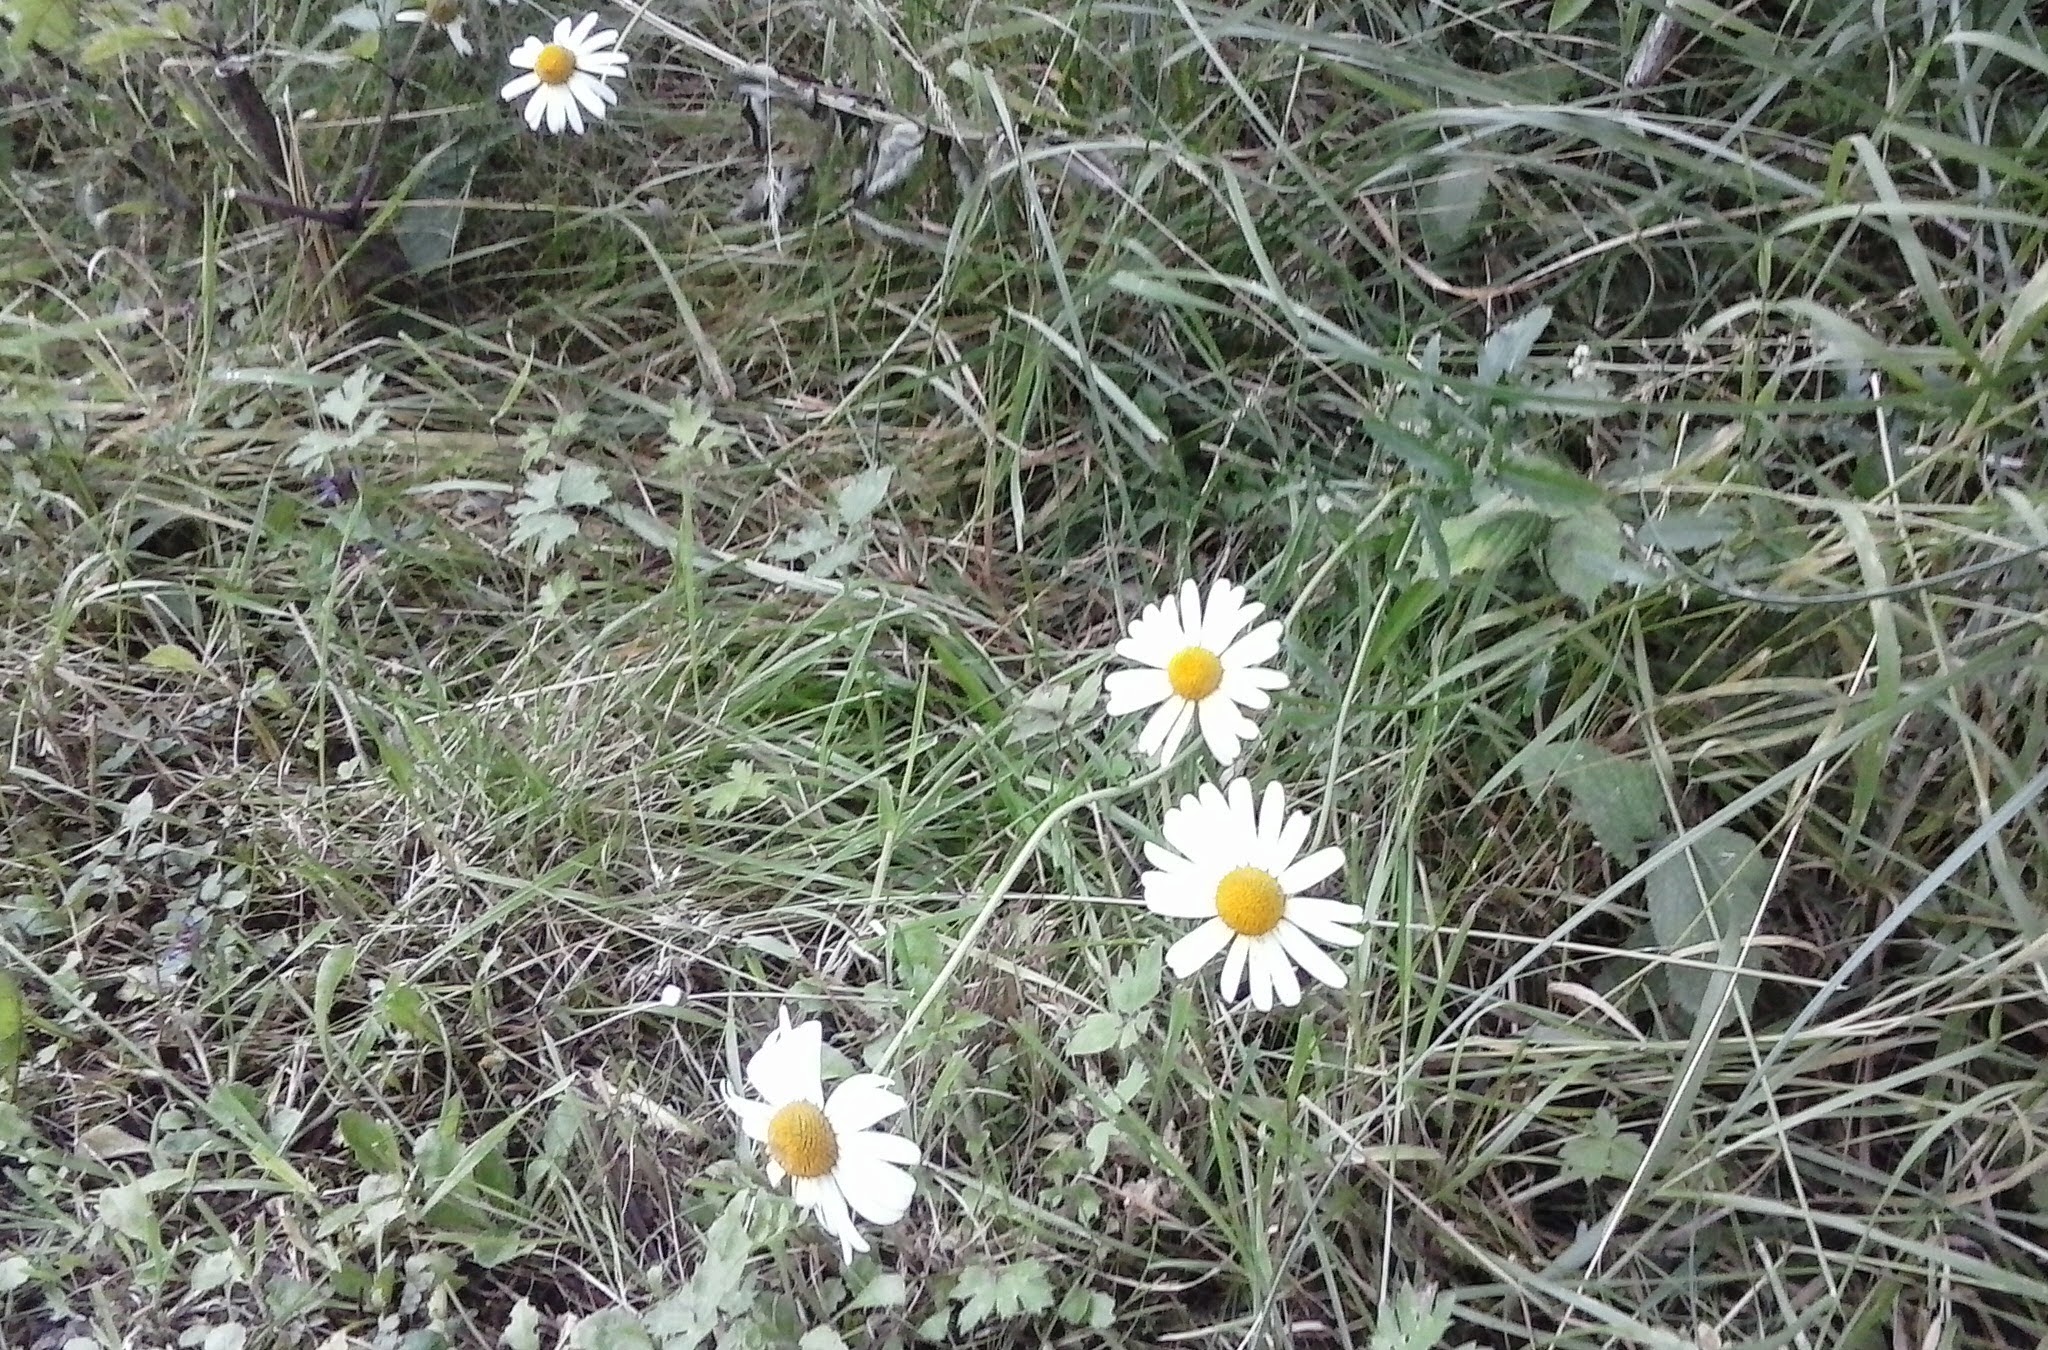 three daisies sitting in the grass in front of other daisies